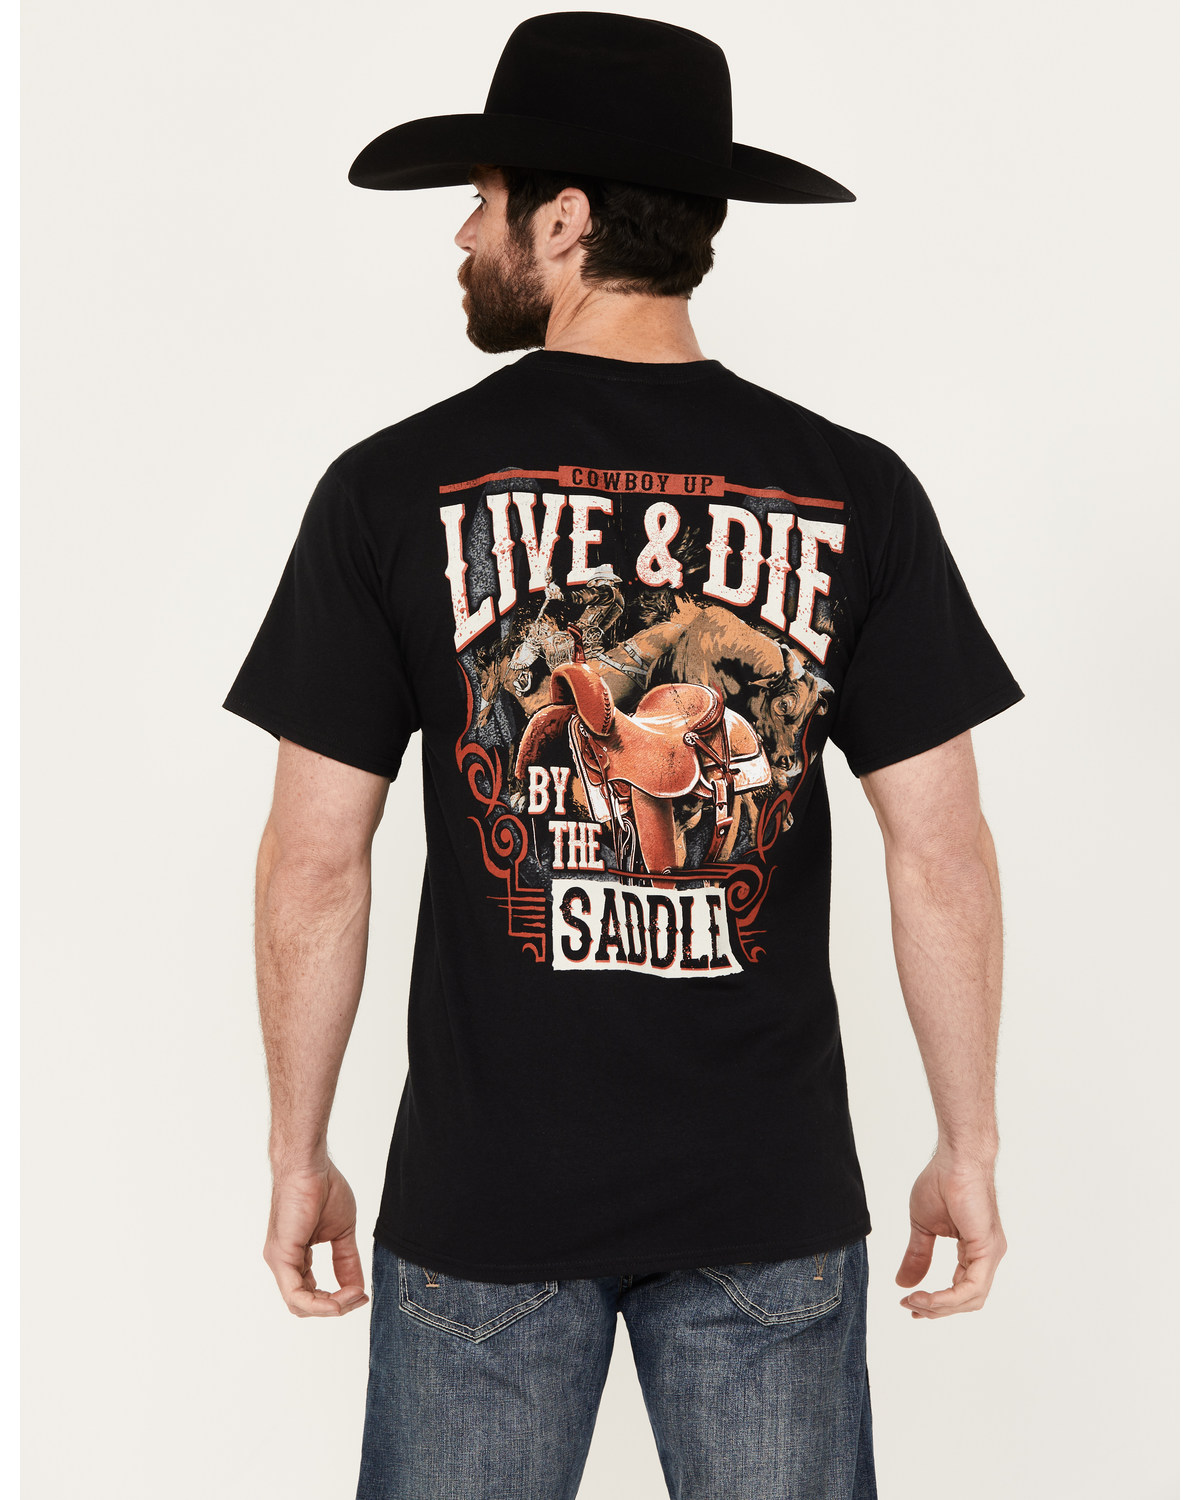 Cowboy Up Men's Live & Die by the Saddle Short Sleeve Graphic T-Shirt